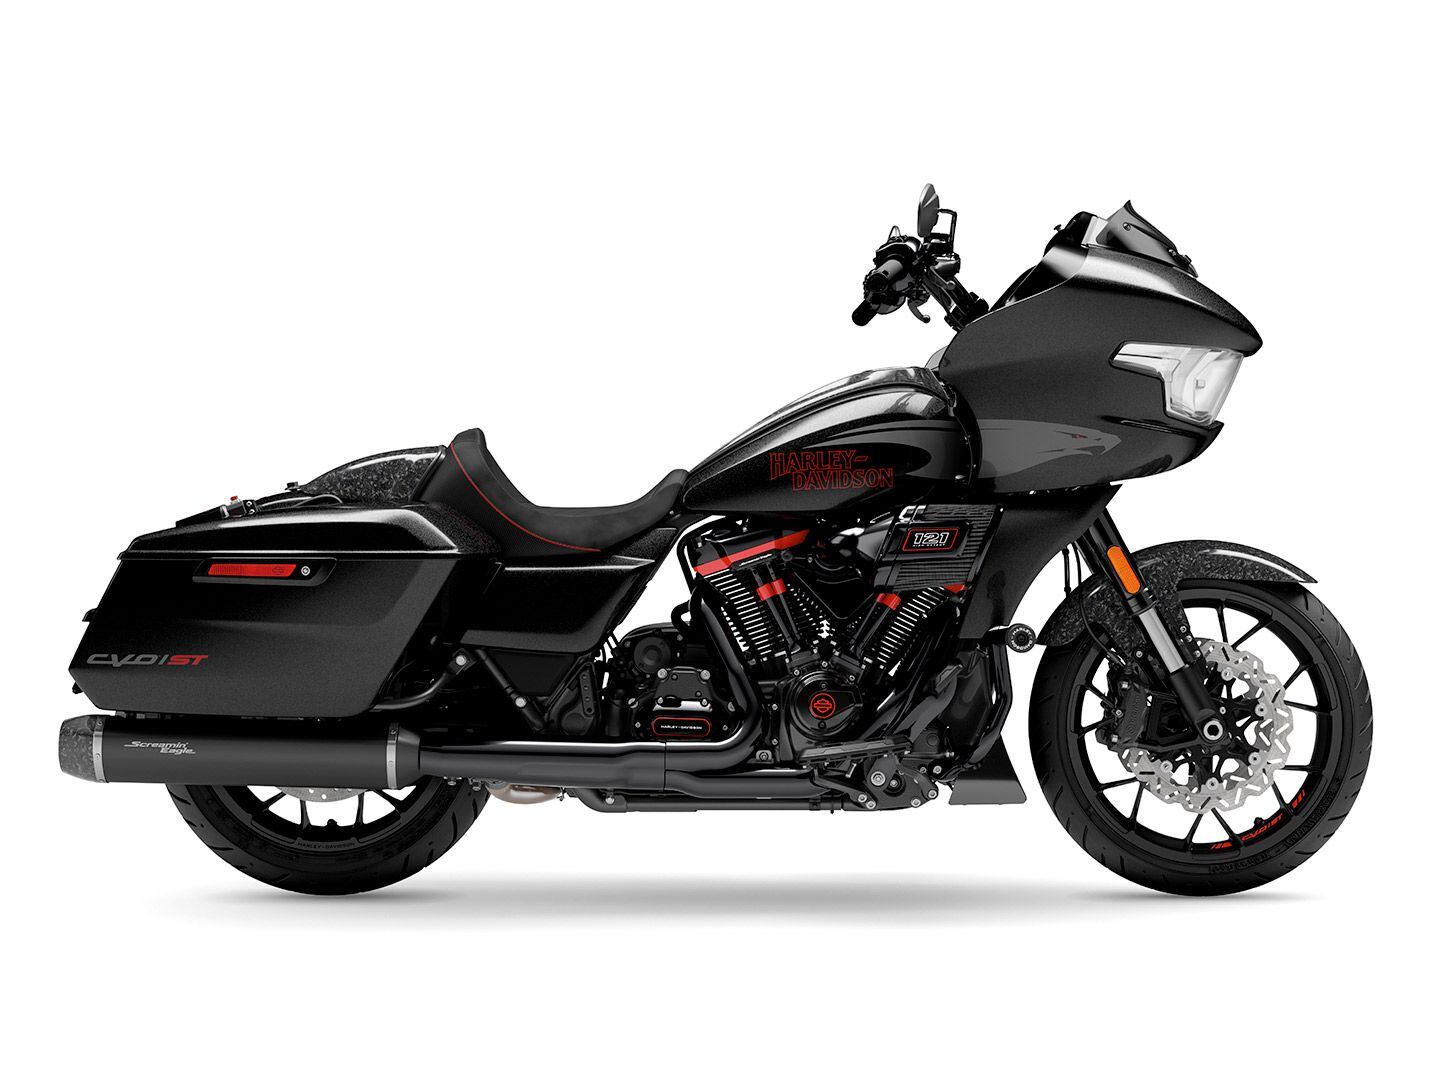 The Harley-Davidson CVO Road Glide ST’s Screamin' Eagle graphic on the fairing and tank is inspired by Harley-Davidson’s factory King of the Baggers racebike.